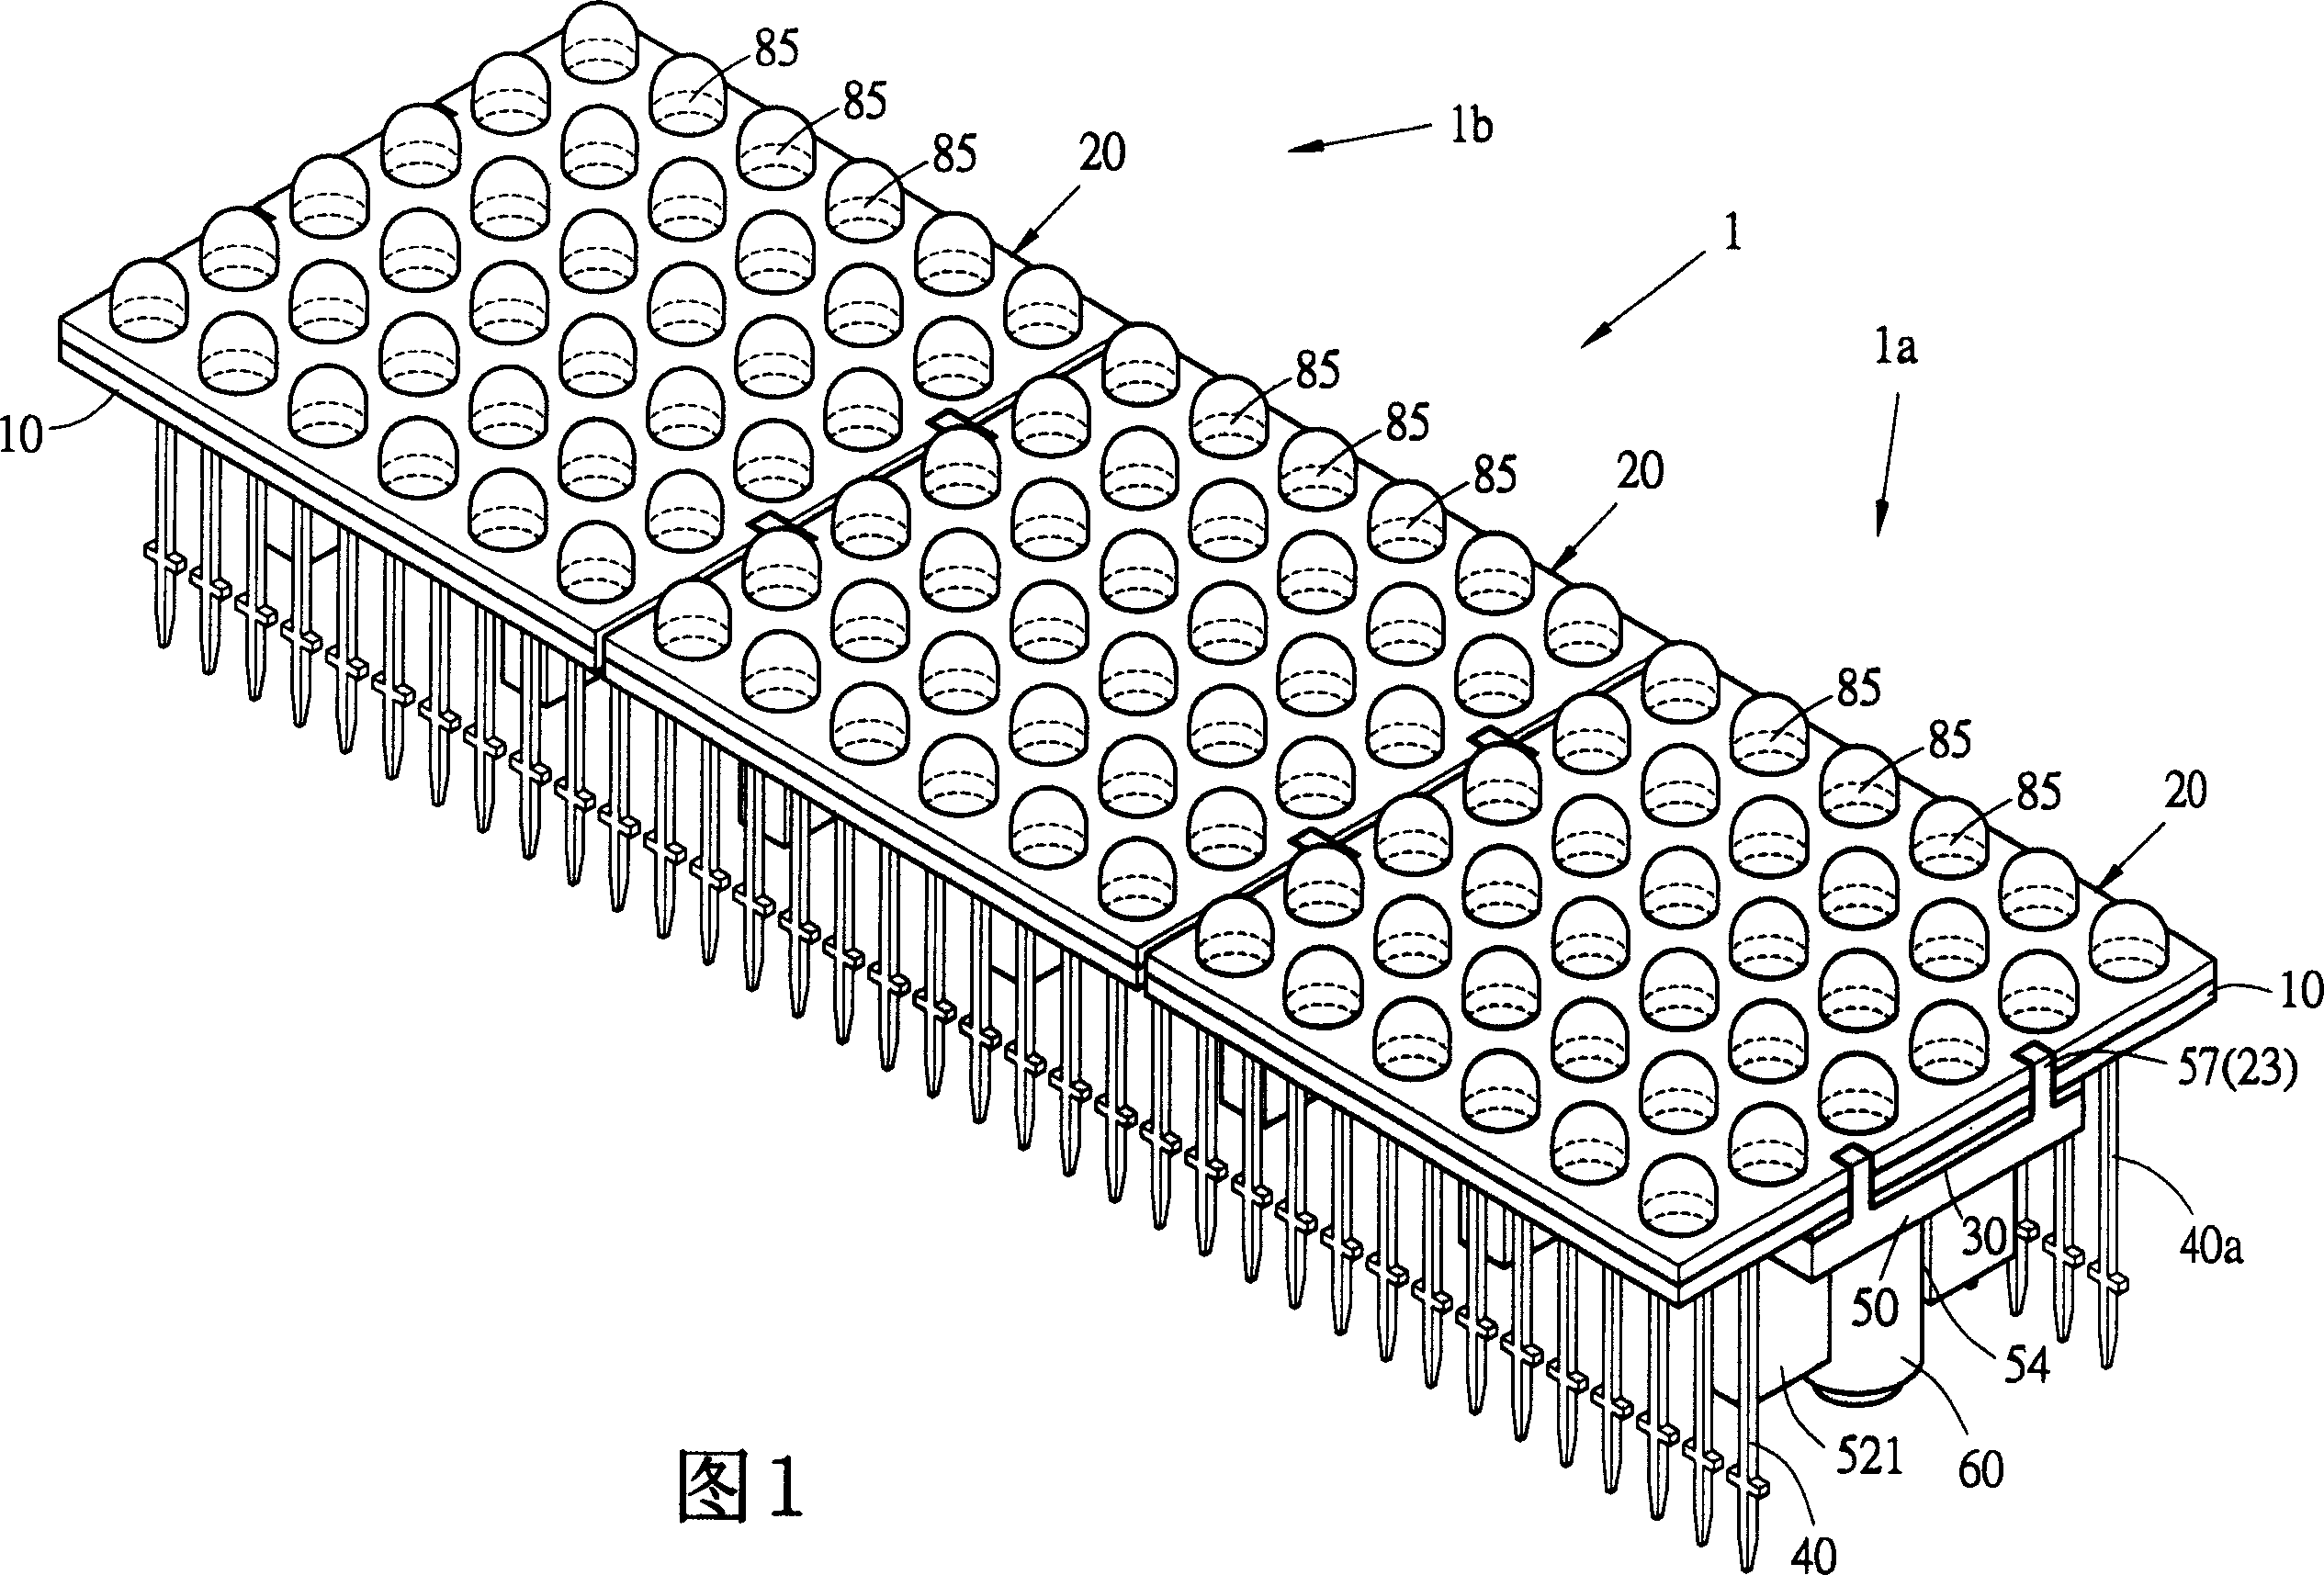 Module device of LED point matrix display